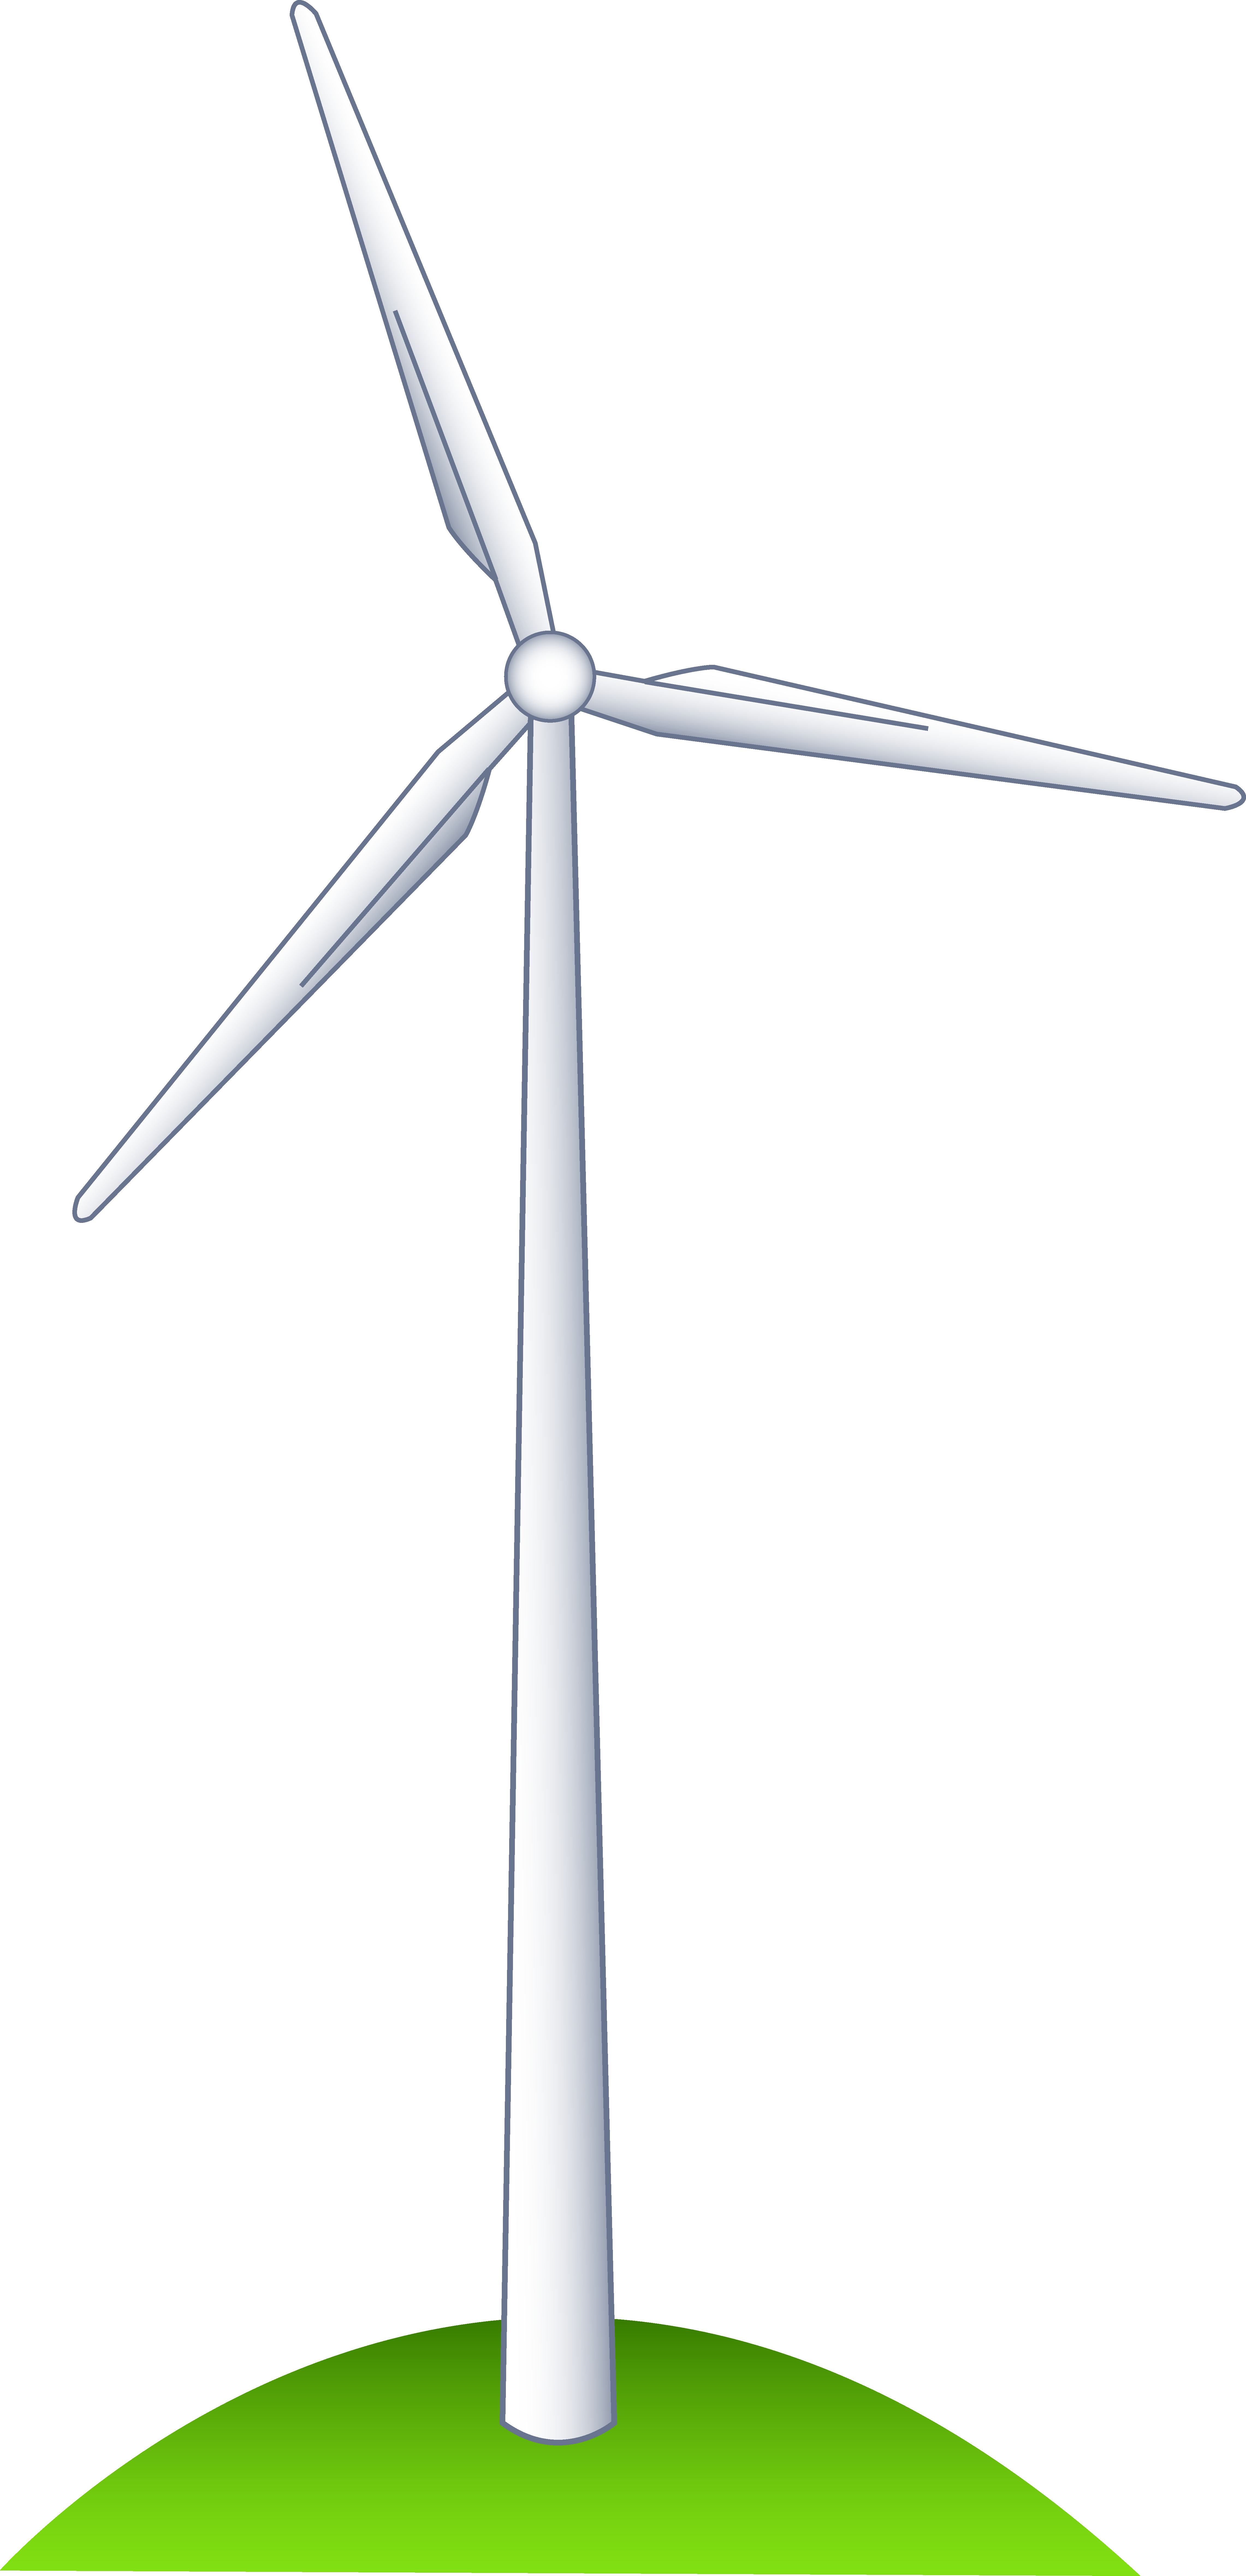 Download 28 Collection Of Free Clipart Wind Turbine - Wind Turbine PNG  Image with No Background 